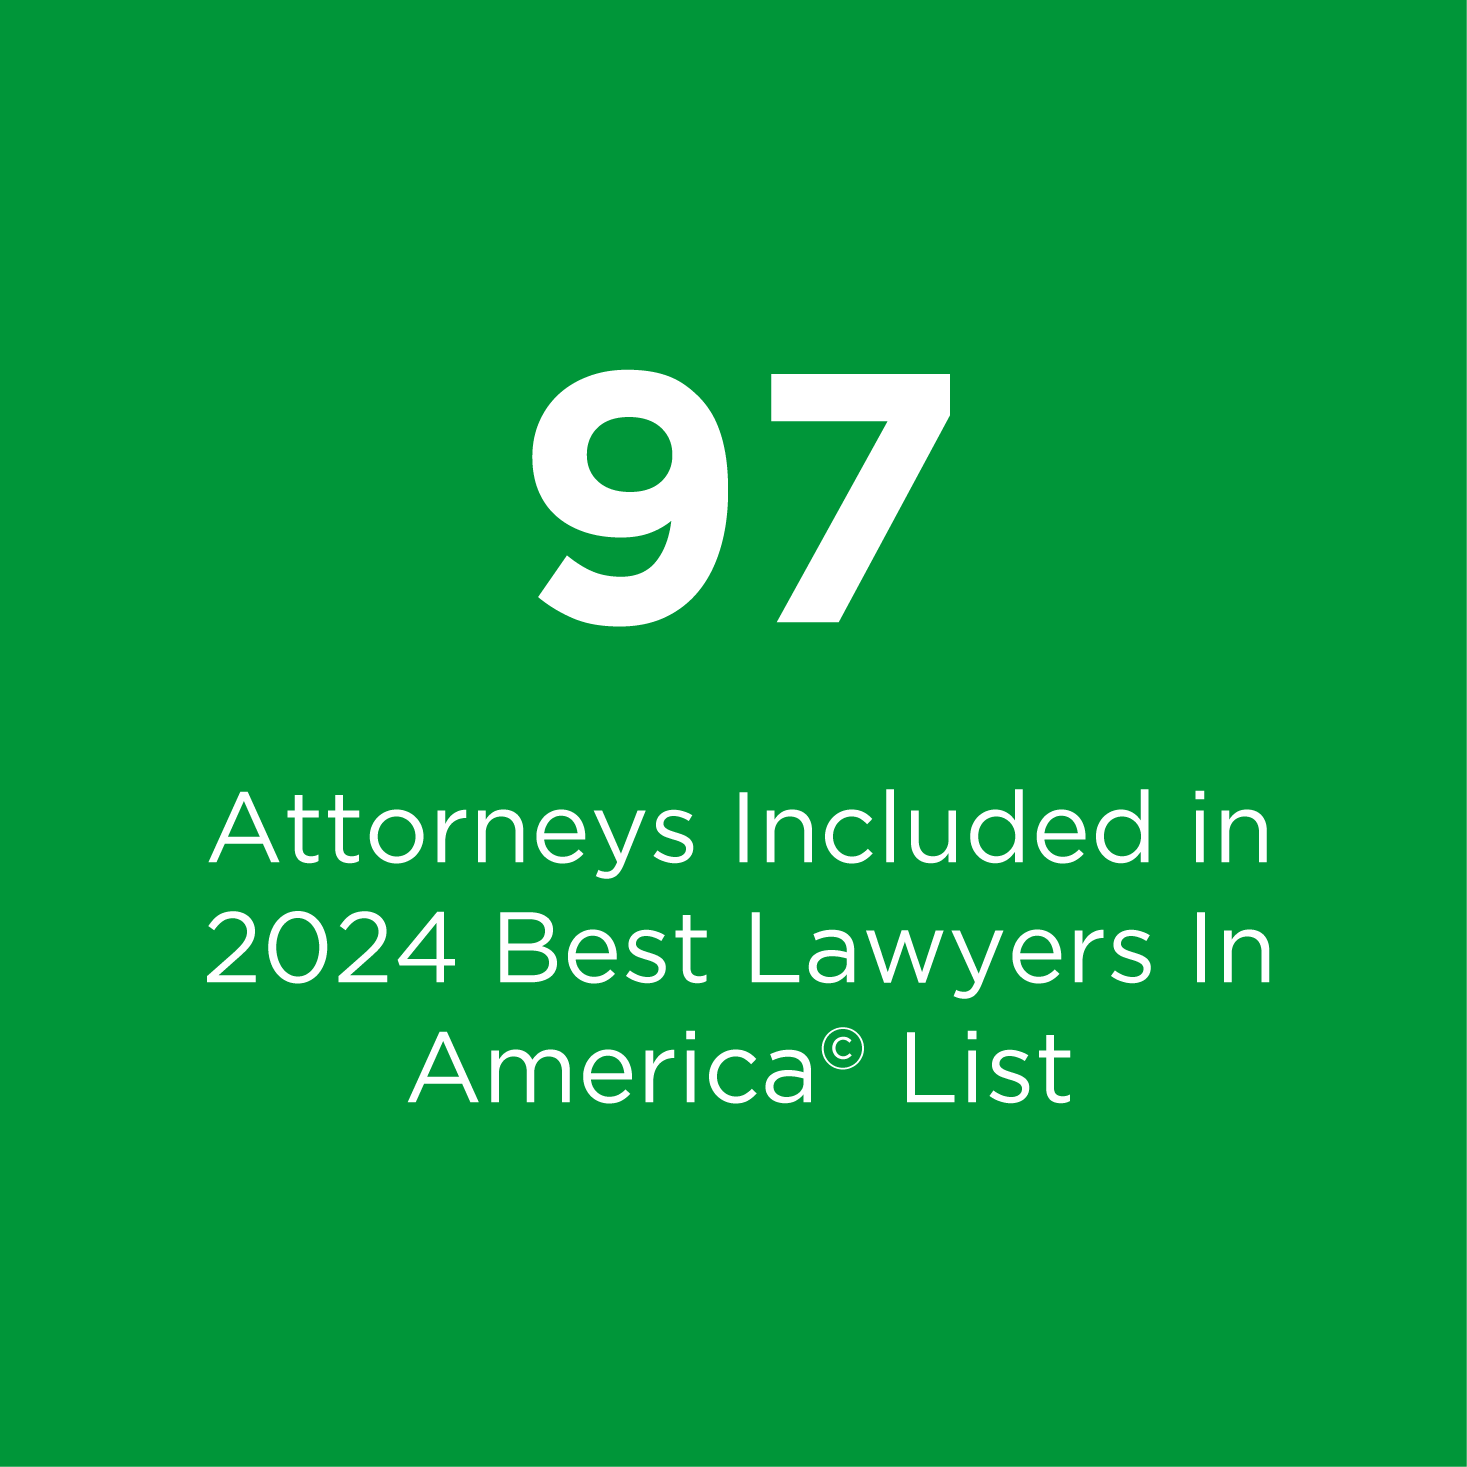 News - 89 Attorneys Included in 2023 Best Lawyers In America© List - 2023